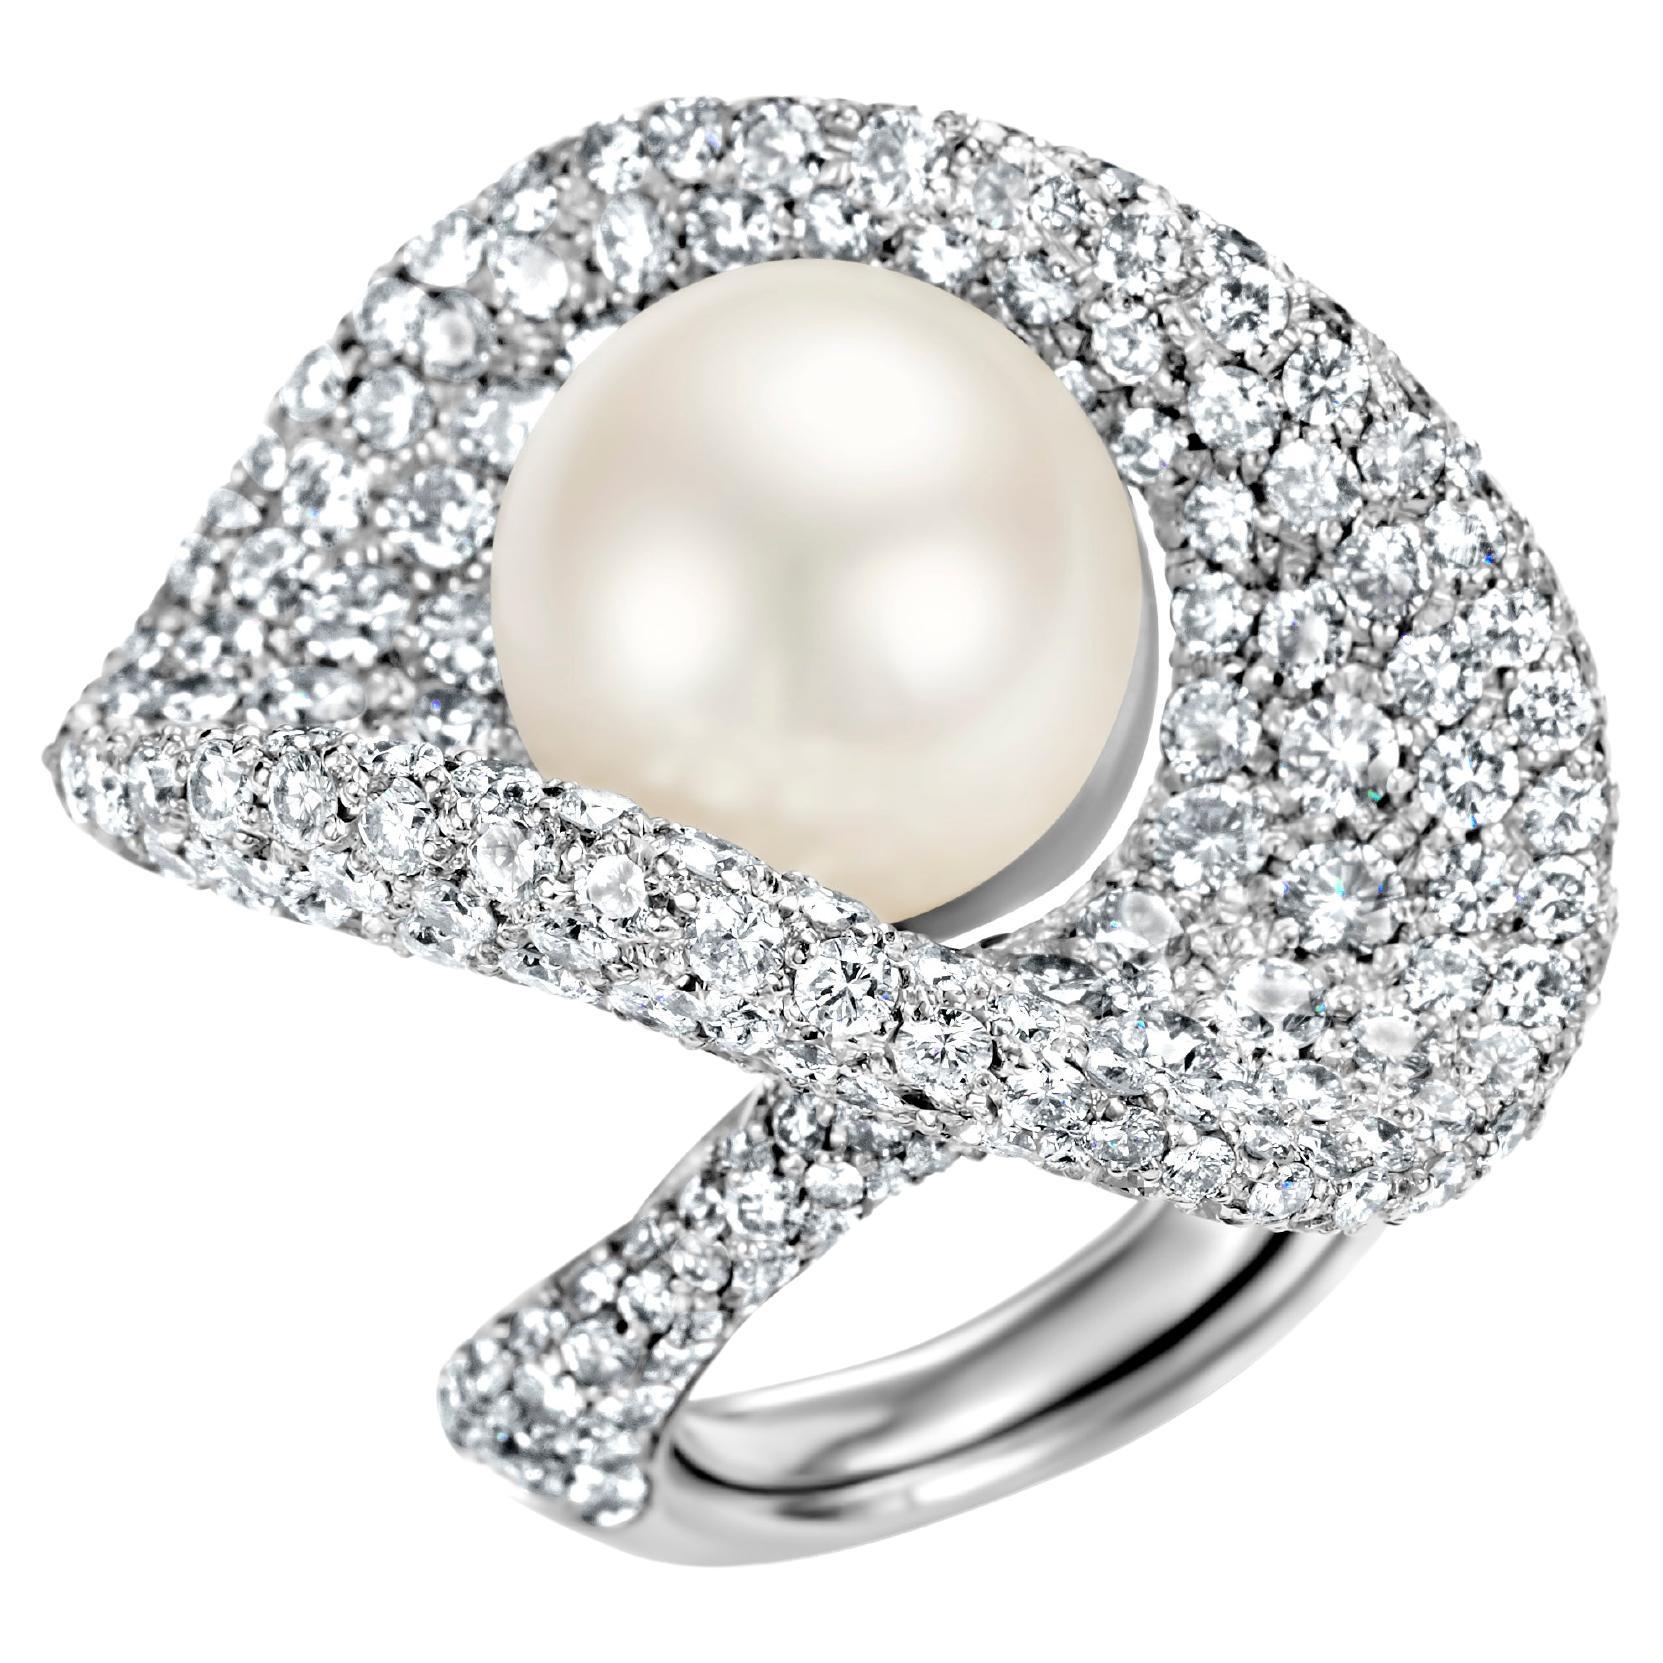 Magnificent 18 Karat White Gold Ring with 14.5 Carat Diamonds and a Big Pearl For Sale 11